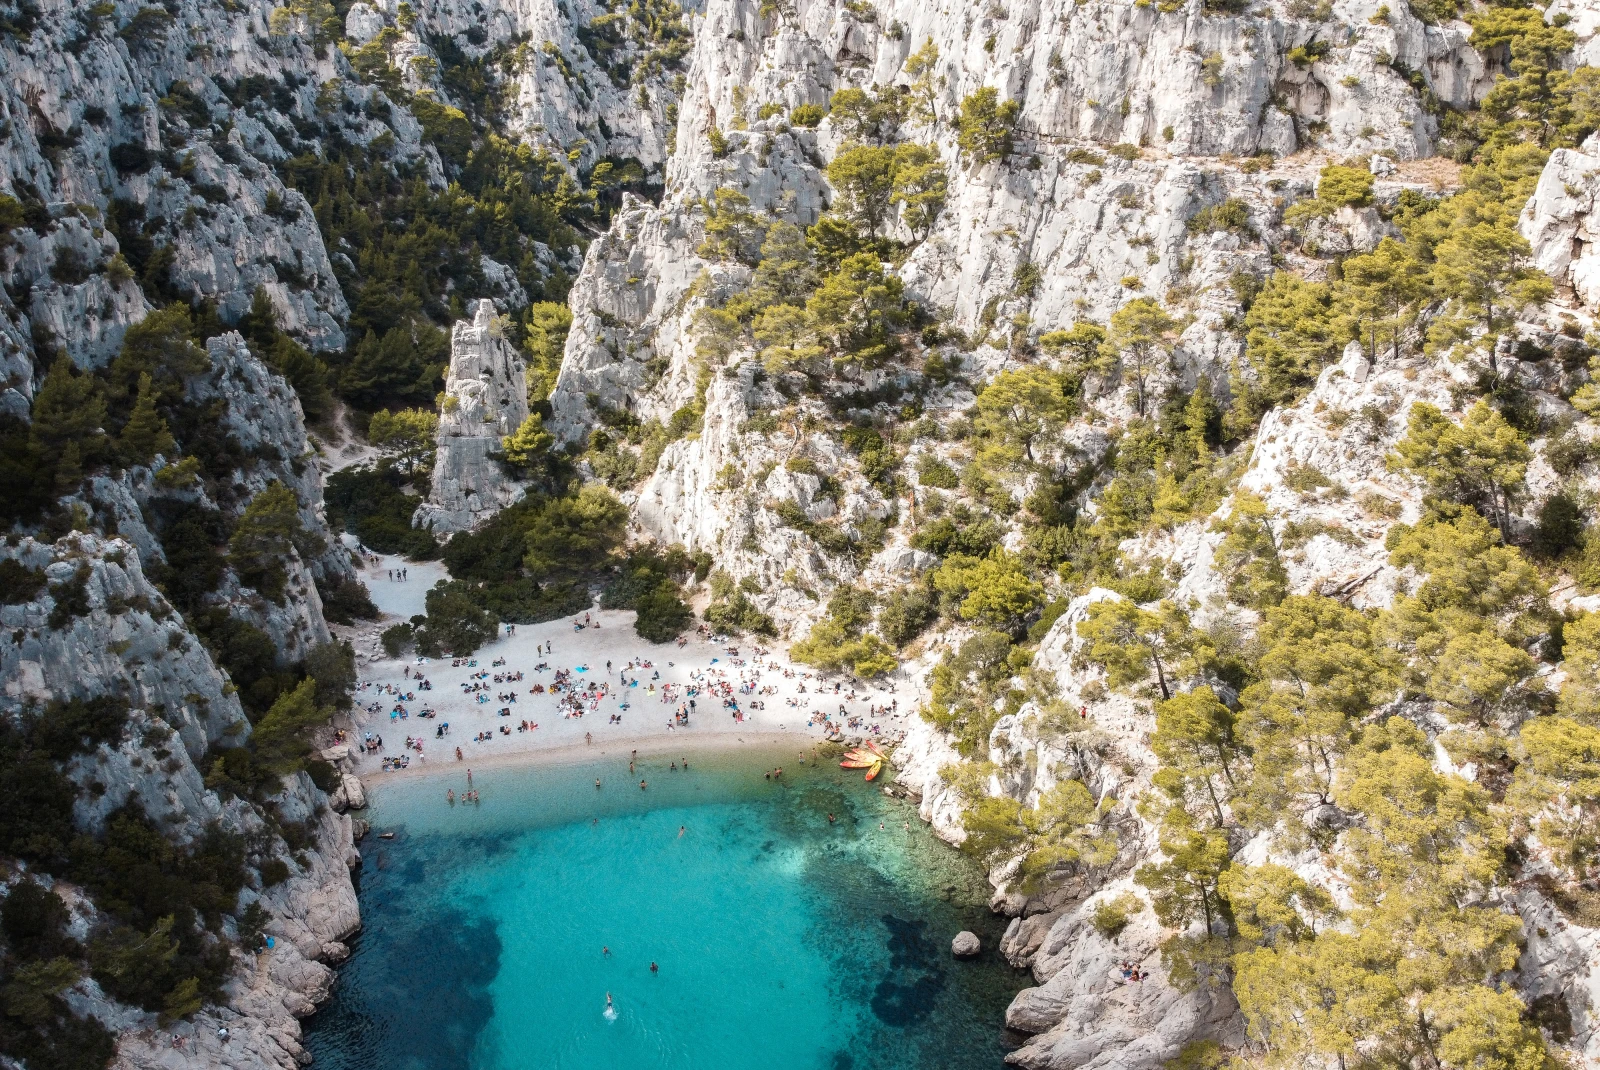 Calanque cove with blue water and white sand beaches in the South of France. 